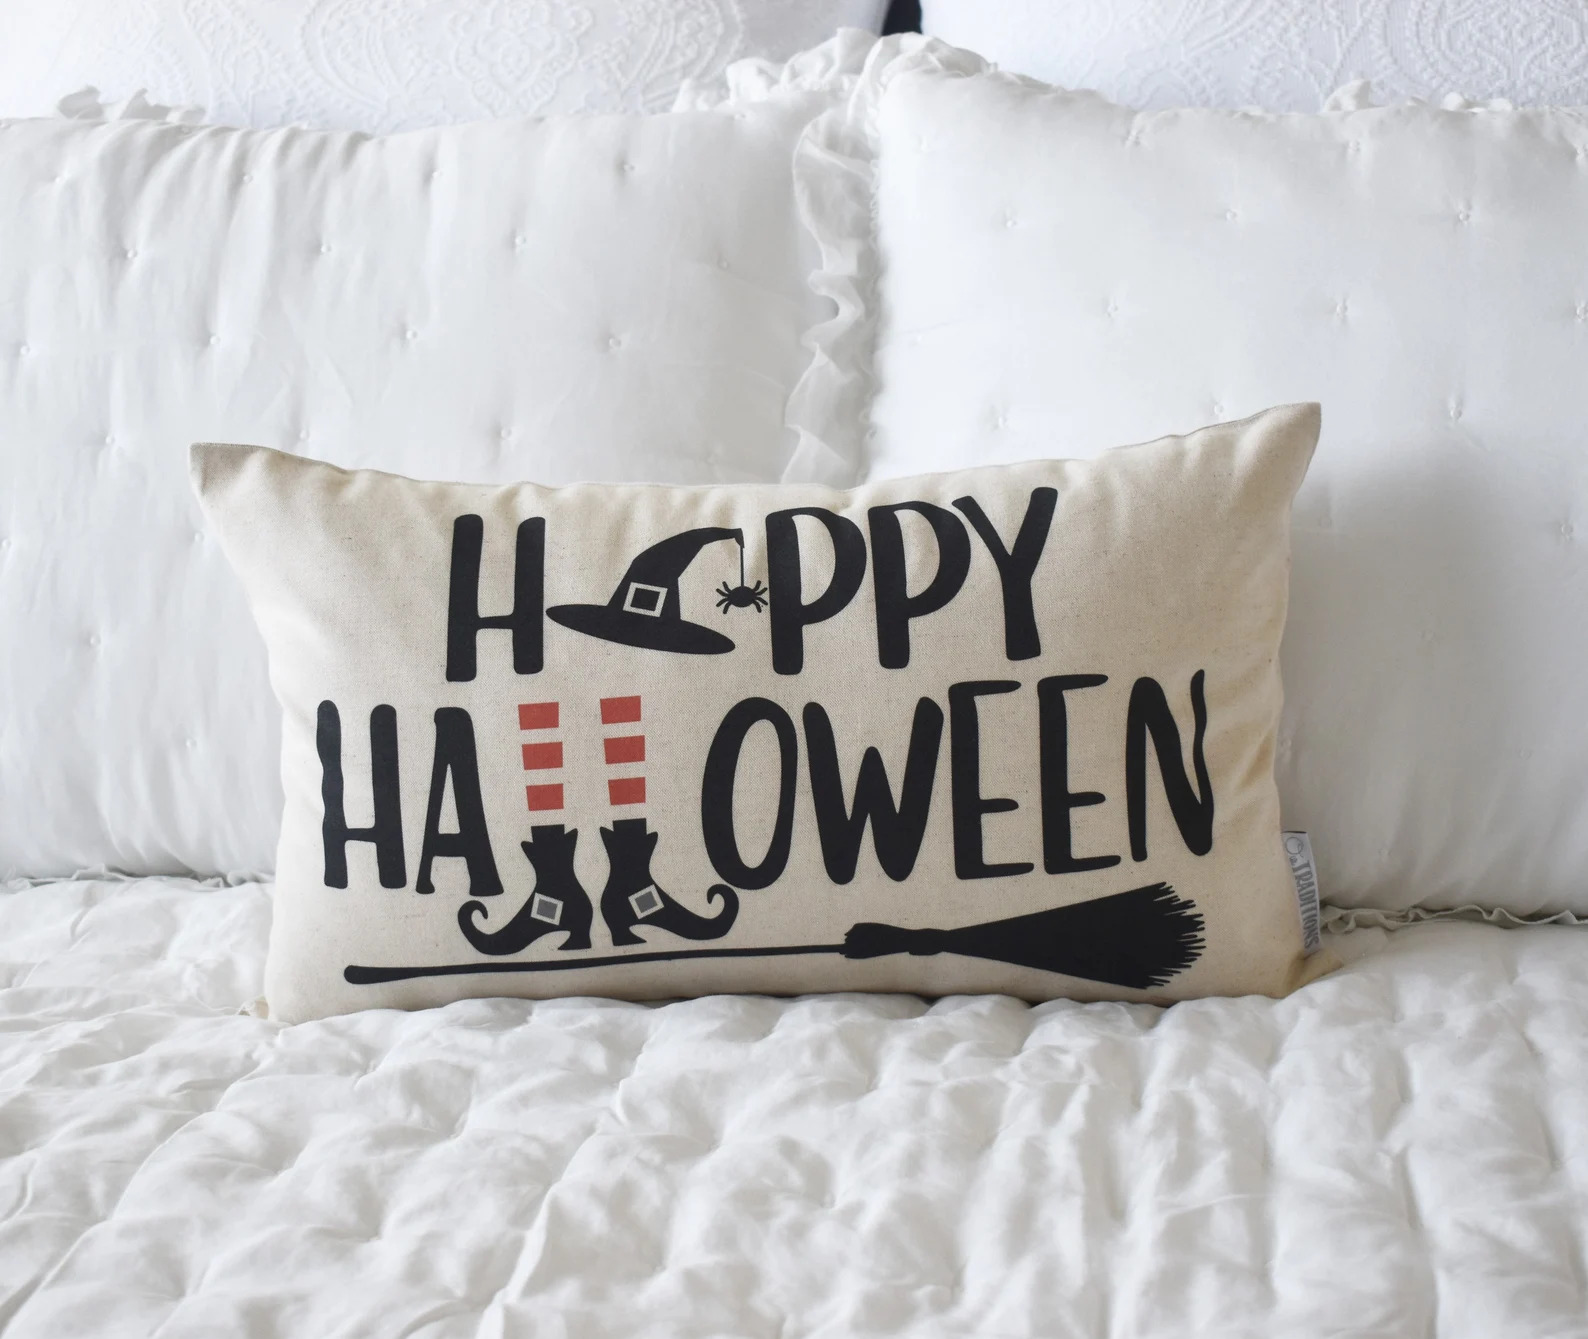 15 Super Spooky Halloween Pillow Designs That You're Going To Adore